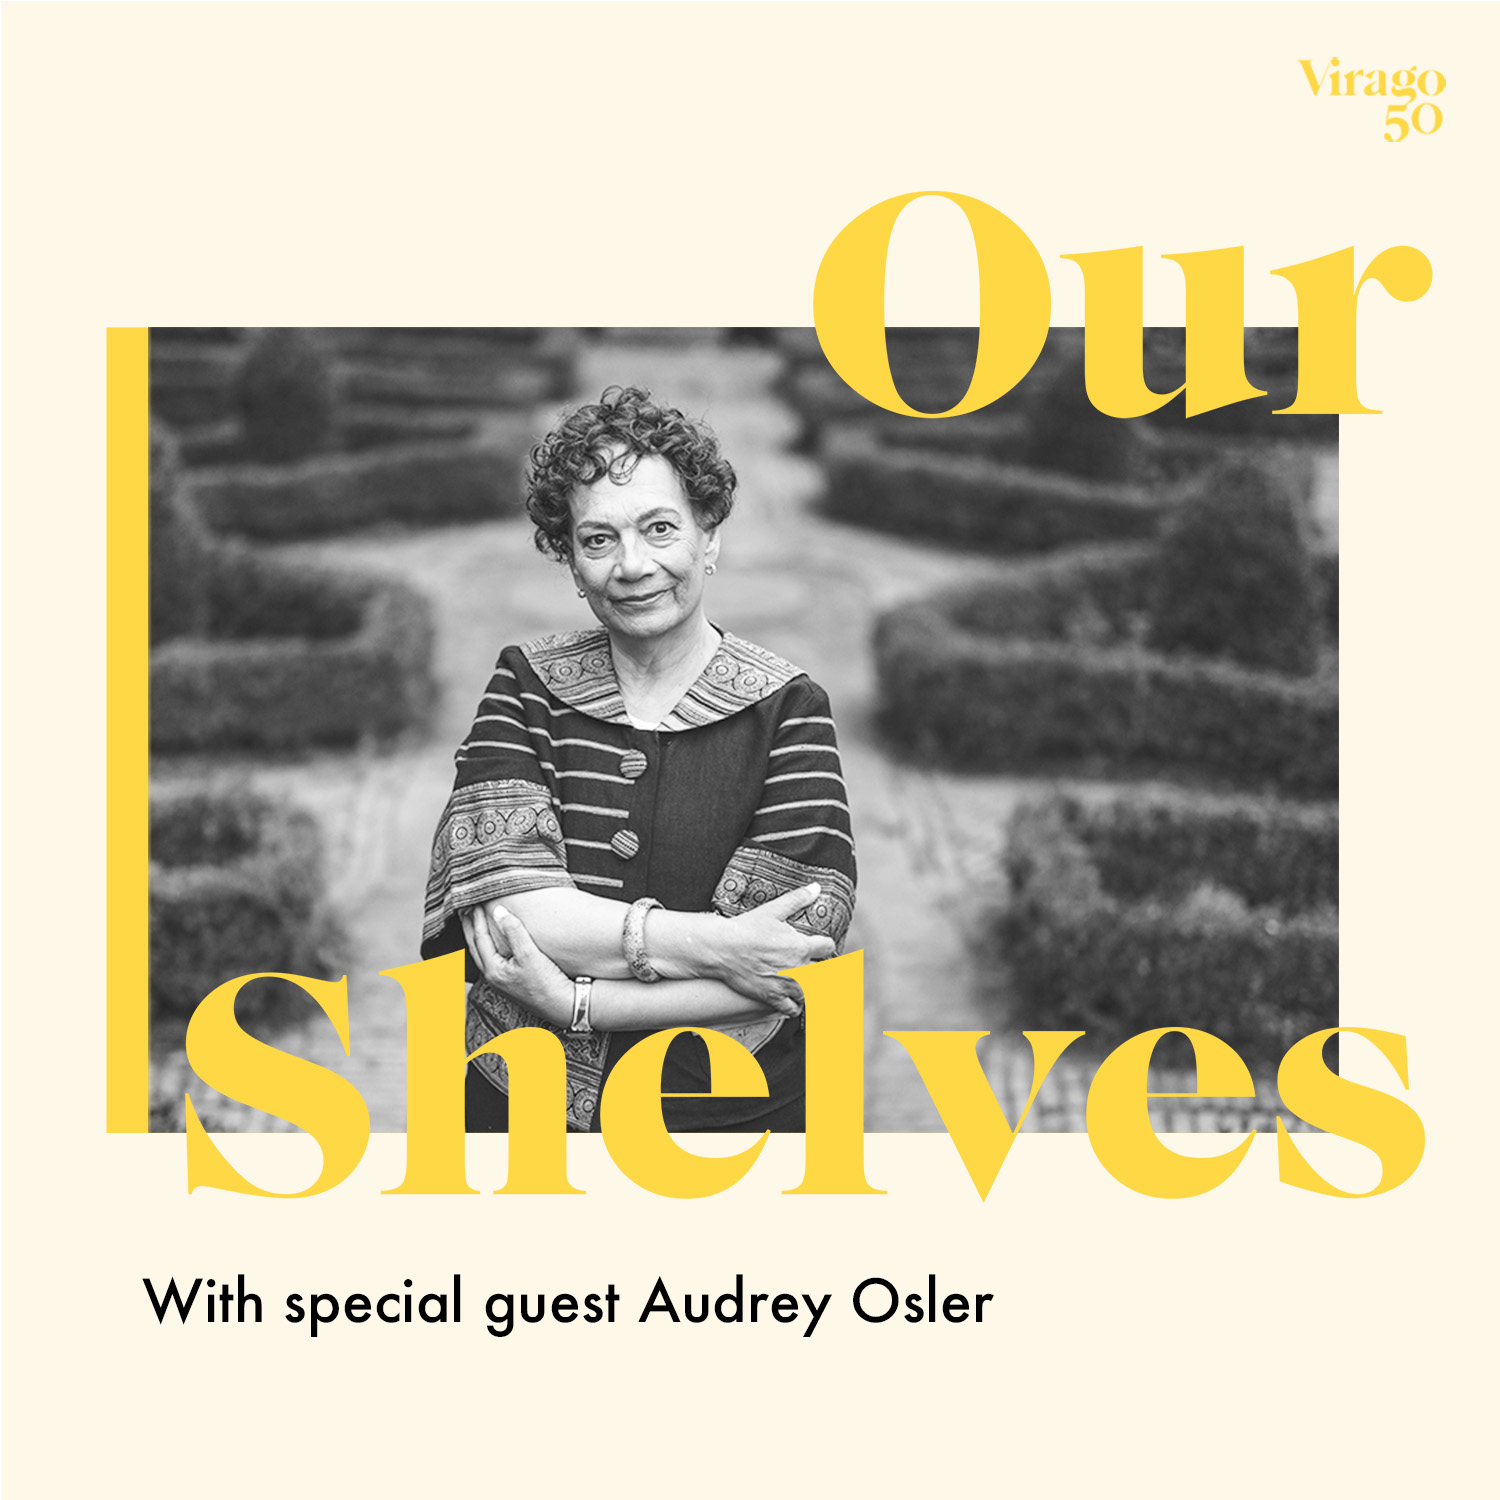 Ourshelves with Audrey Osler